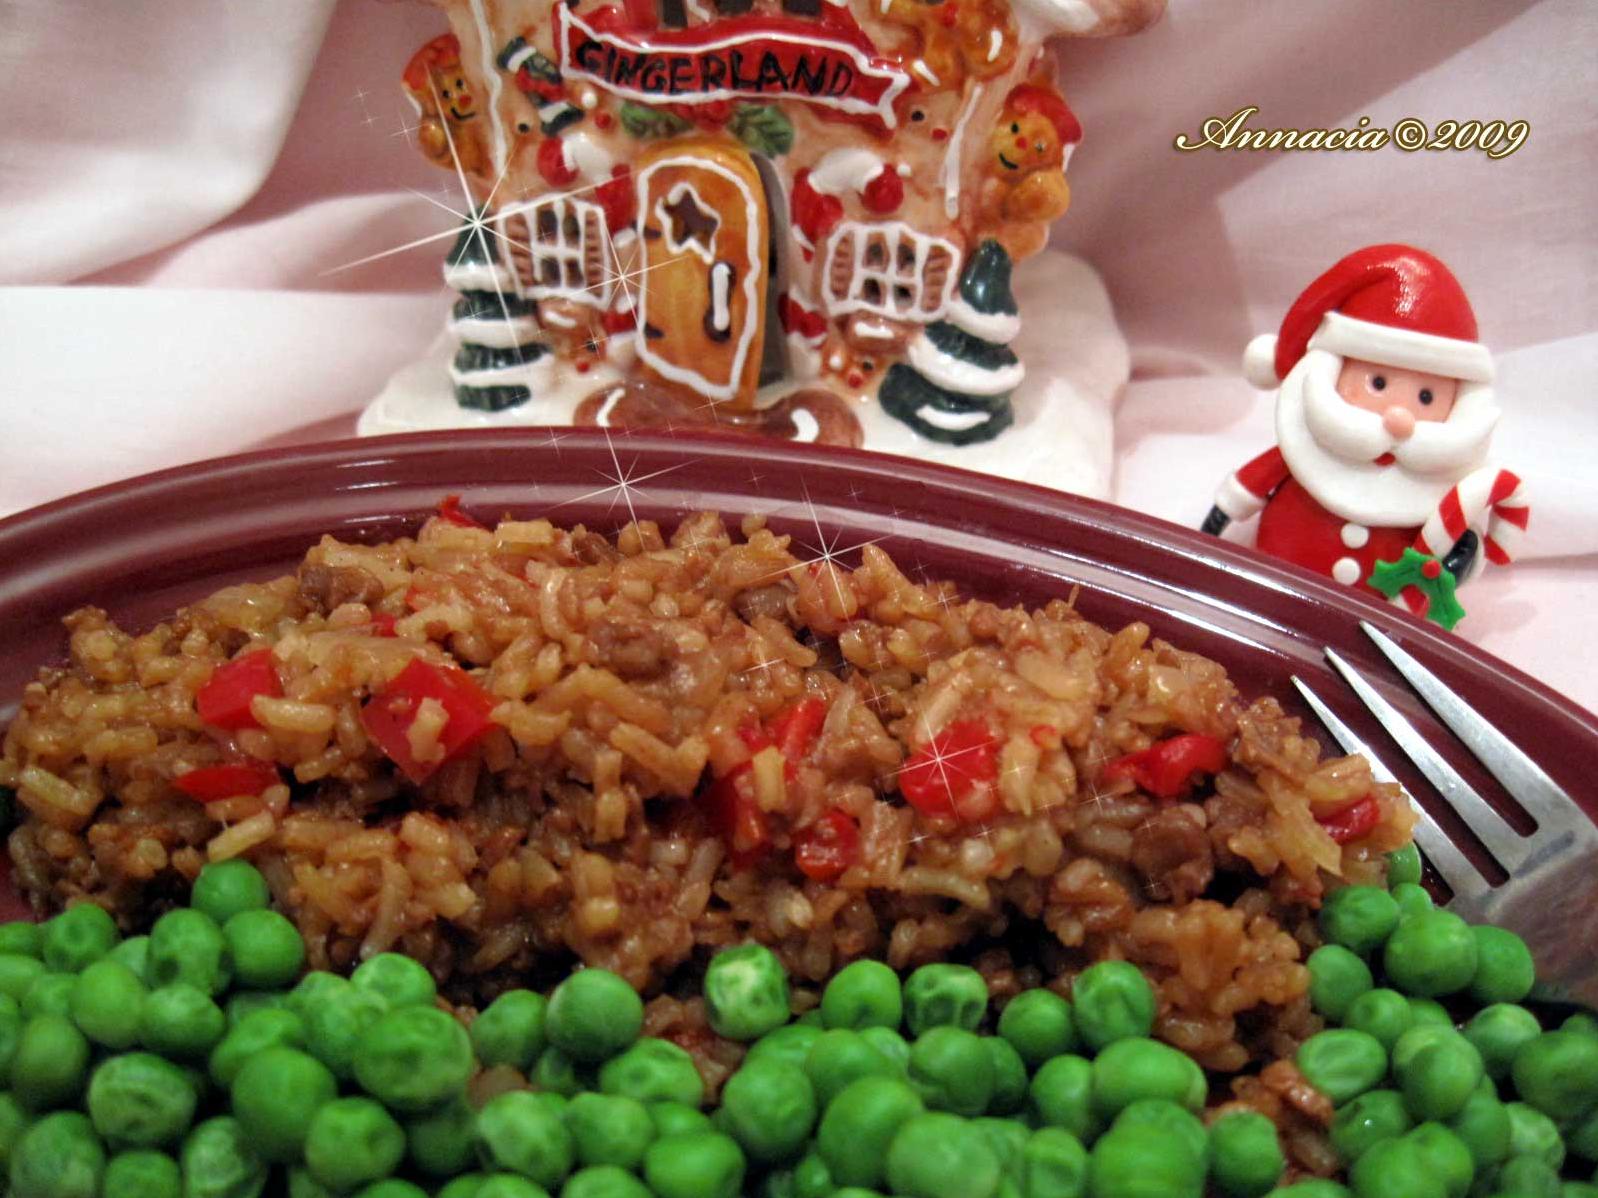  Time to elevate your hamburger game with this delicious Hamburger Pilaf!